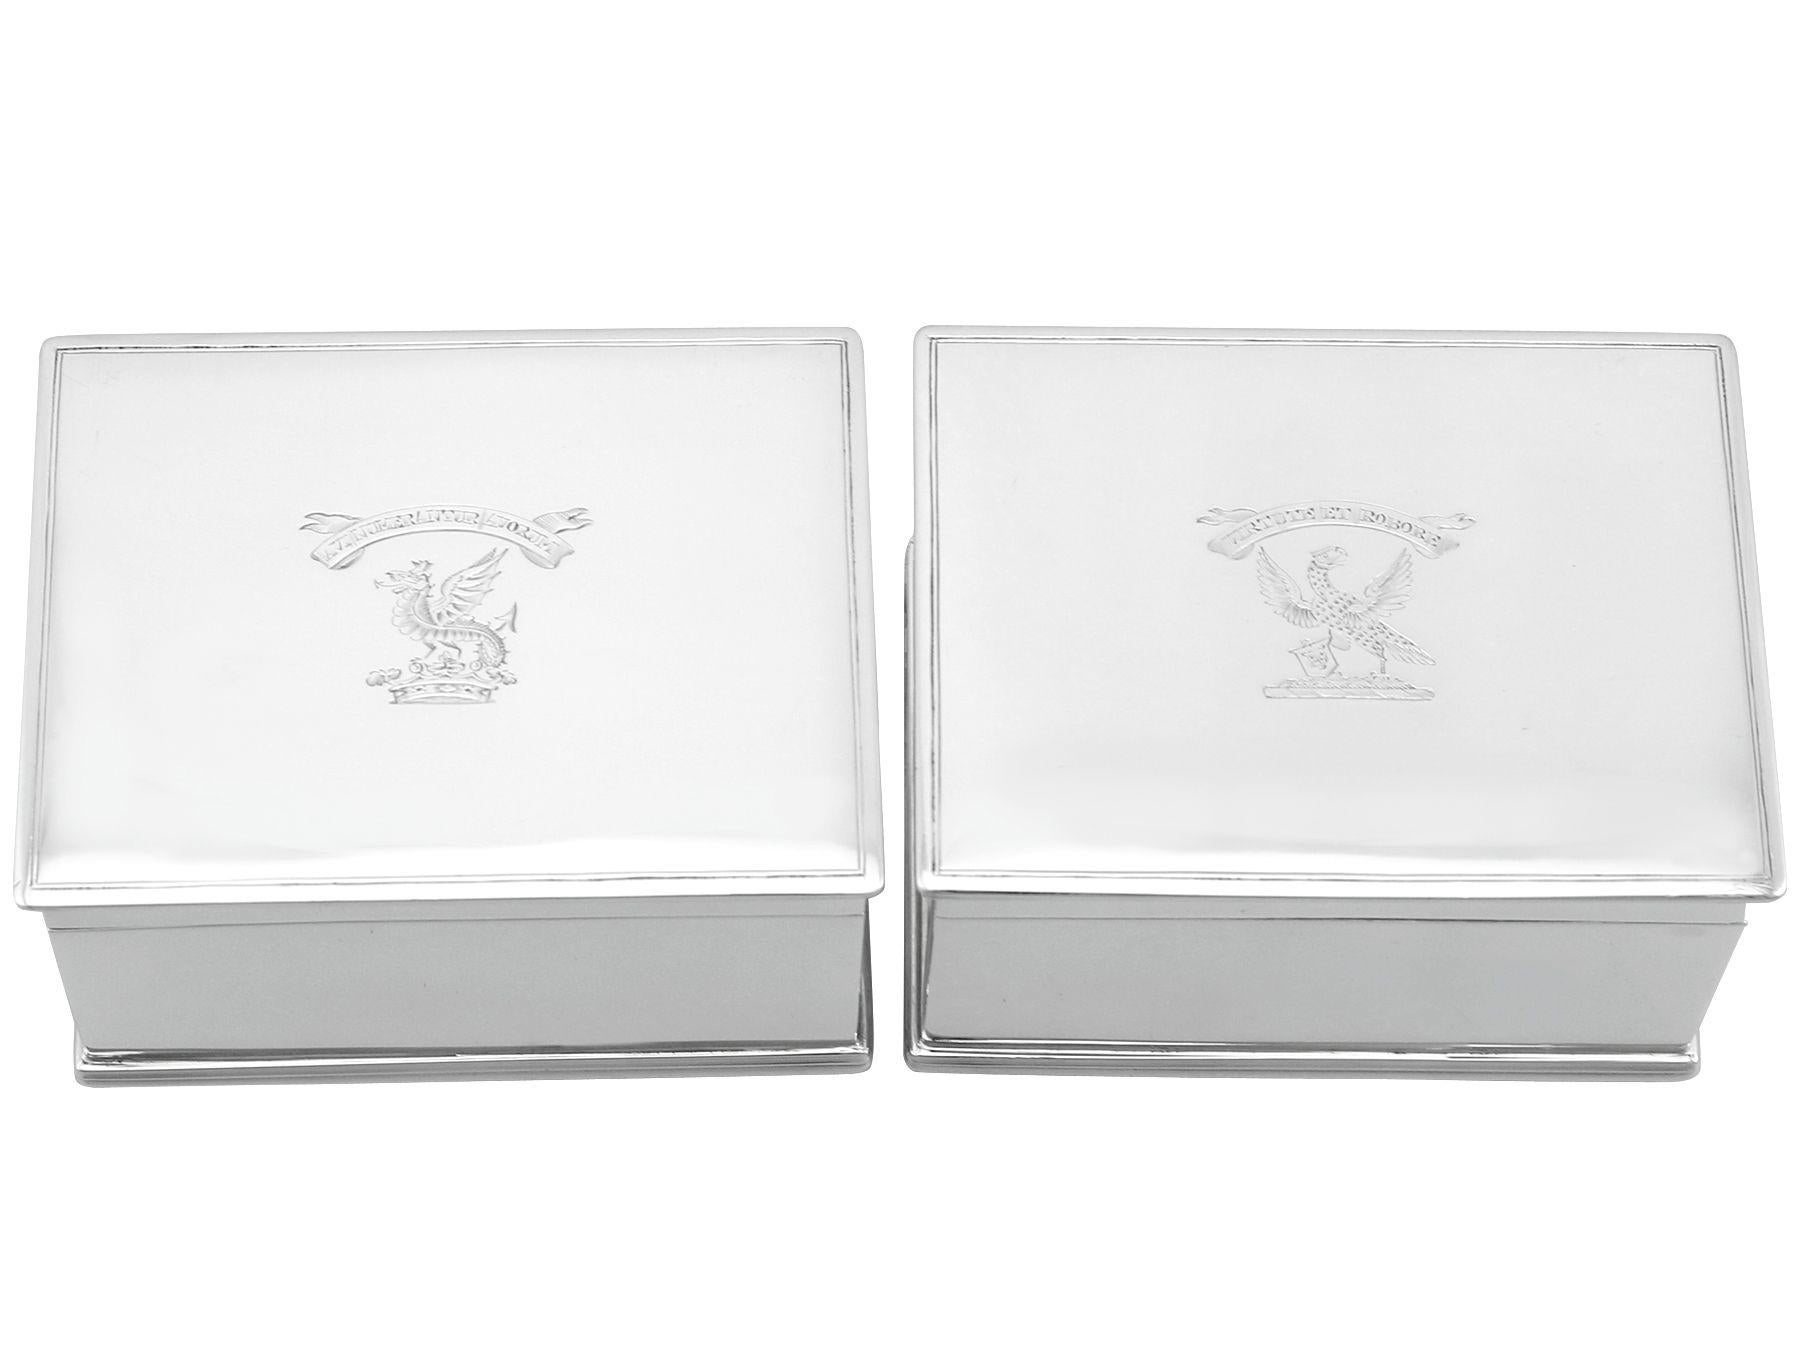 An exceptional, fine and impressive, rare pair of antique George IV English sterling silver boxes; an addition to our 19th century silverware collection.

These exceptional and rare antique George IV sterling silver boxes have a plain rectangular